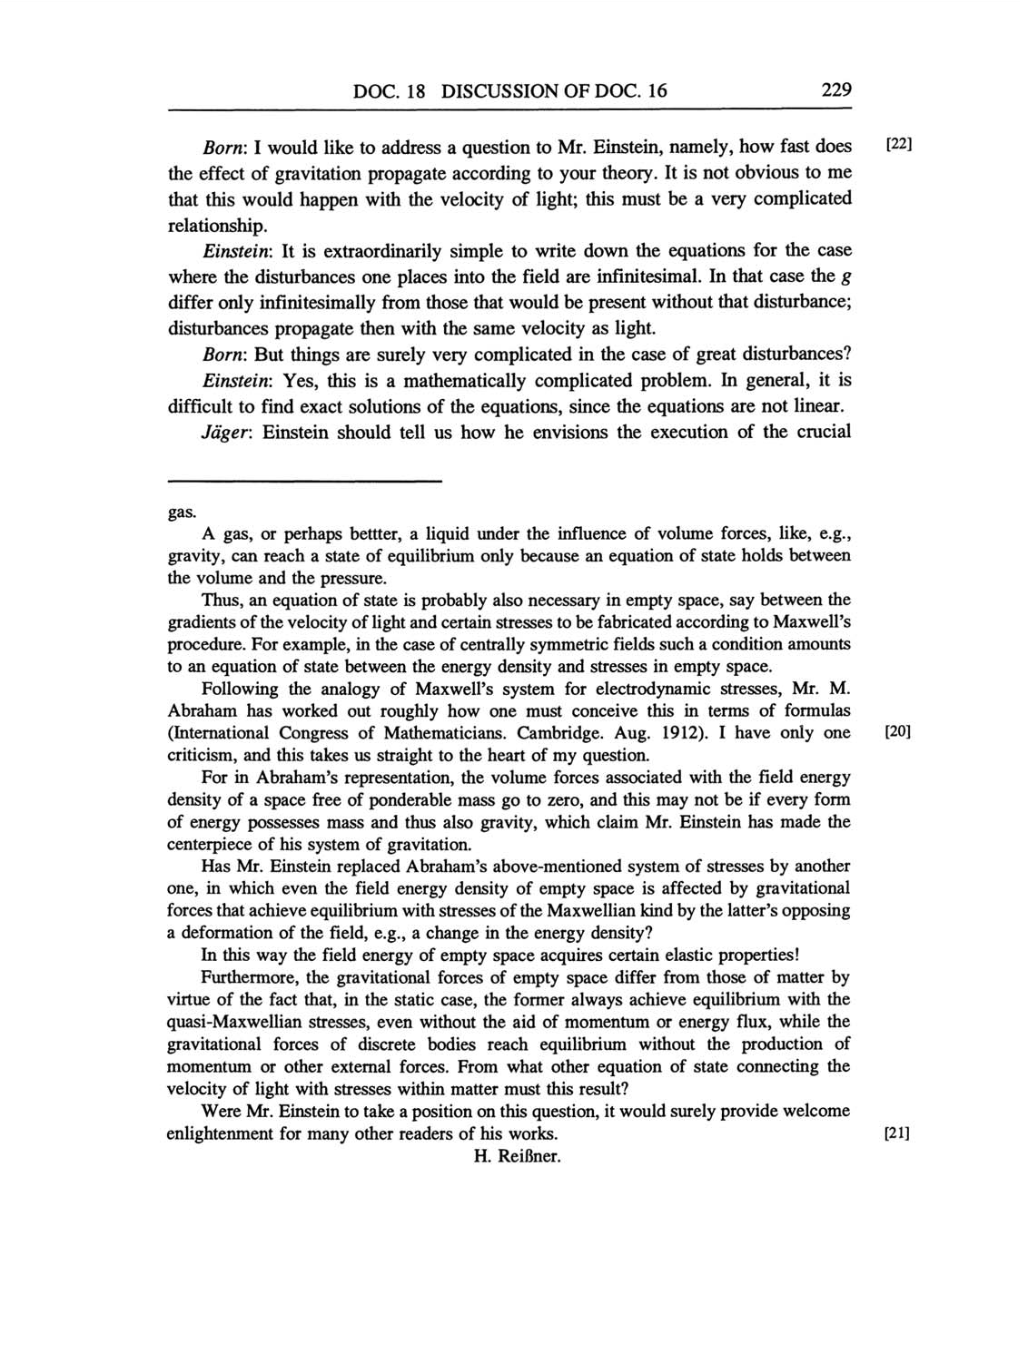 Volume 4: The Swiss Years: Writings 1912-1914 (English translation supplement) page 229